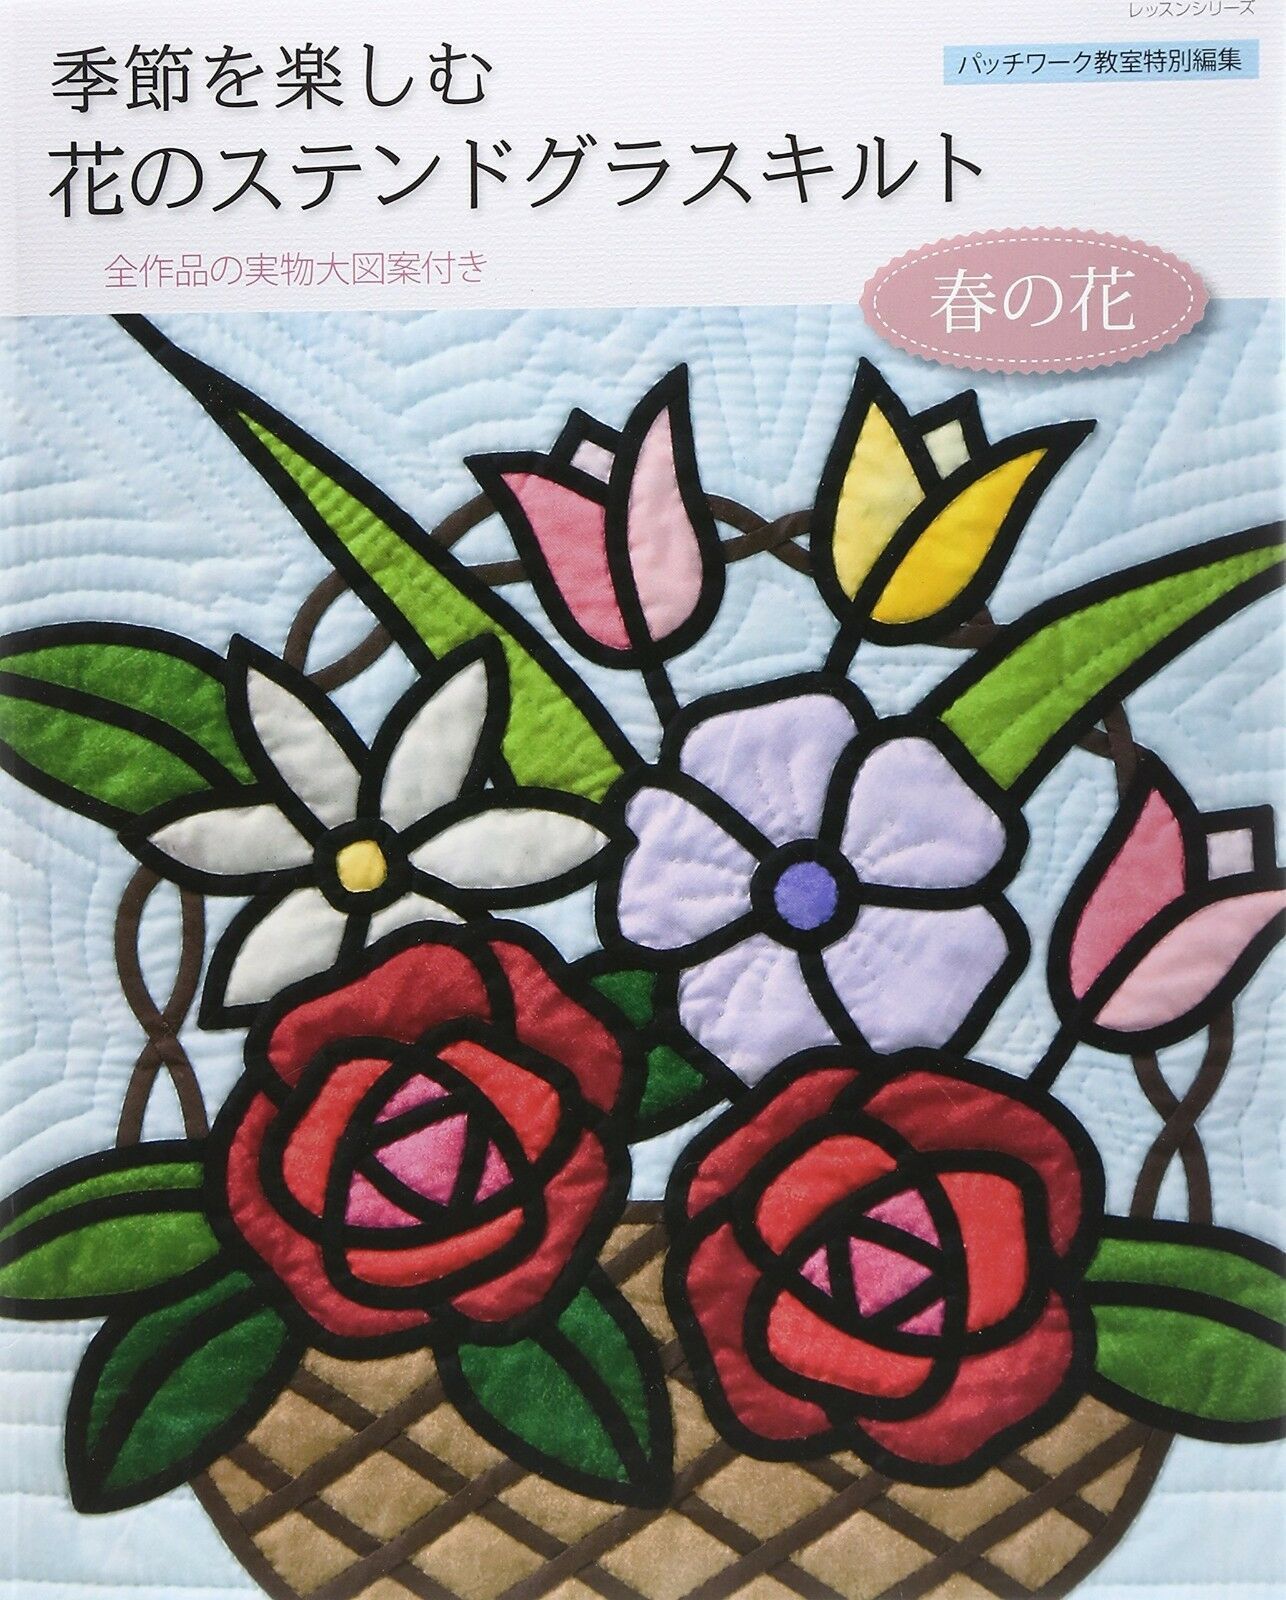 Primary image for Flower Stained Glass Quilt Spring Flower Japanese Craft Pattern Book